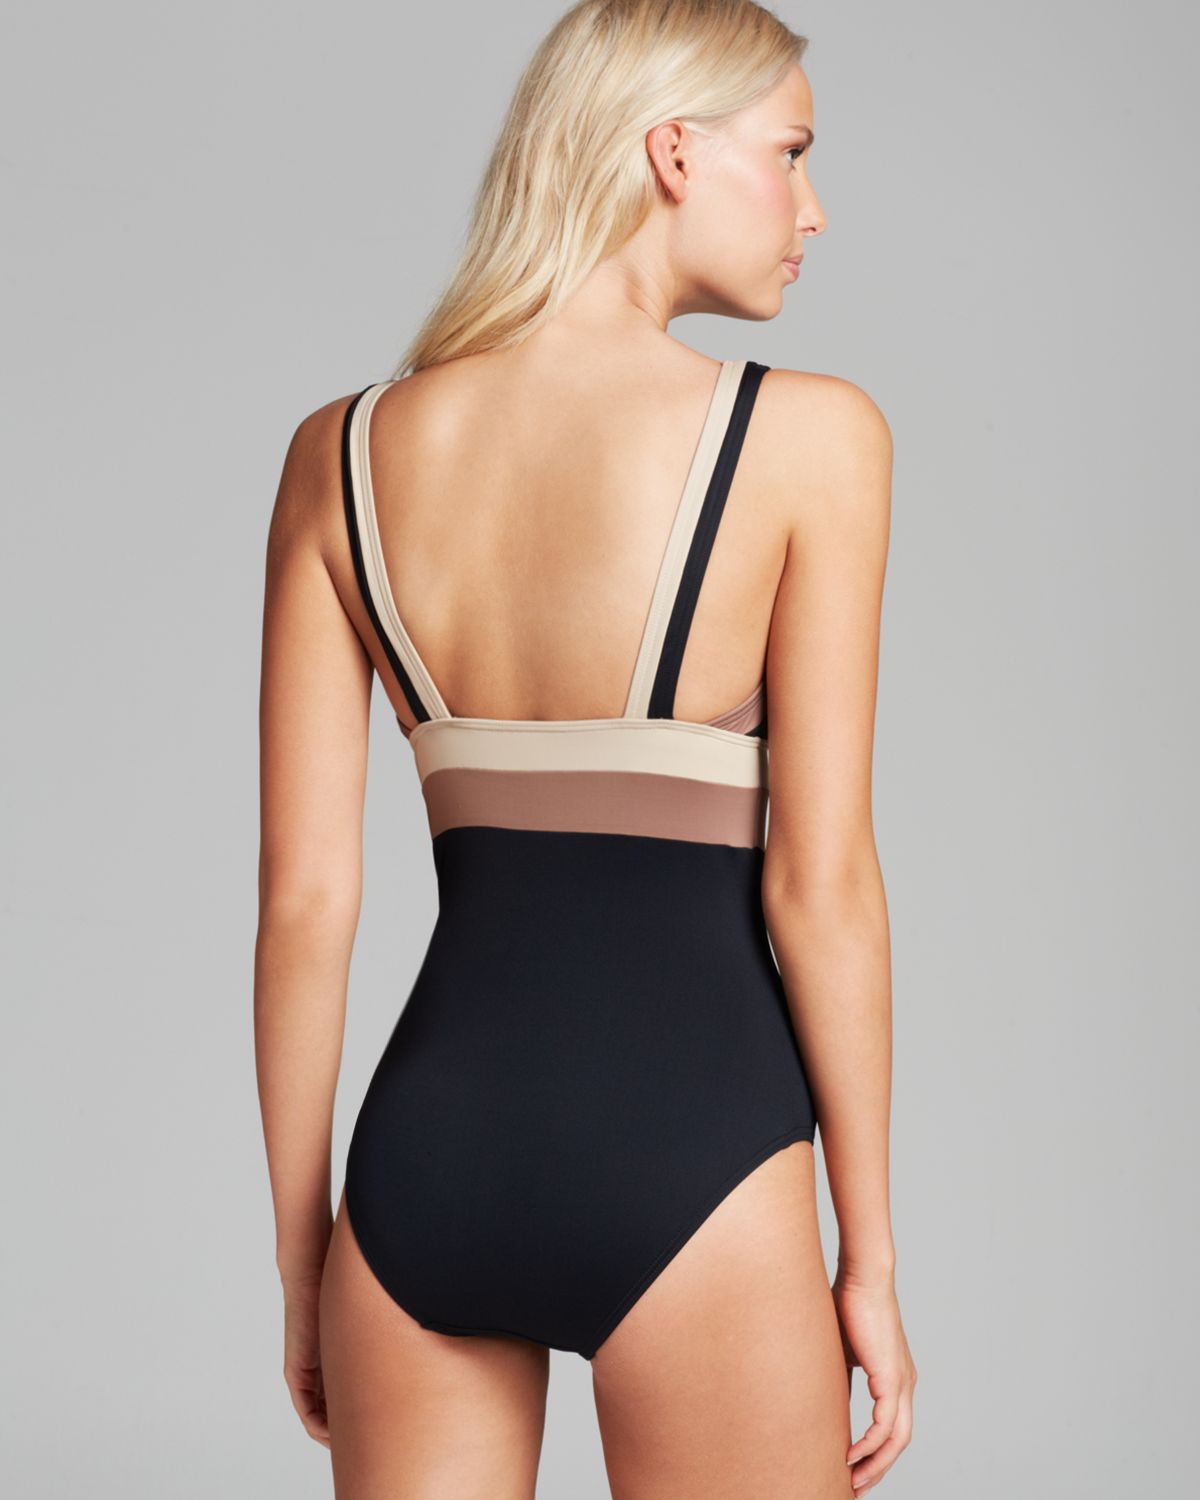 Dkny Color Block V Neck Maillot One Piece Swimsuit in Black | Lyst1200 x 1500